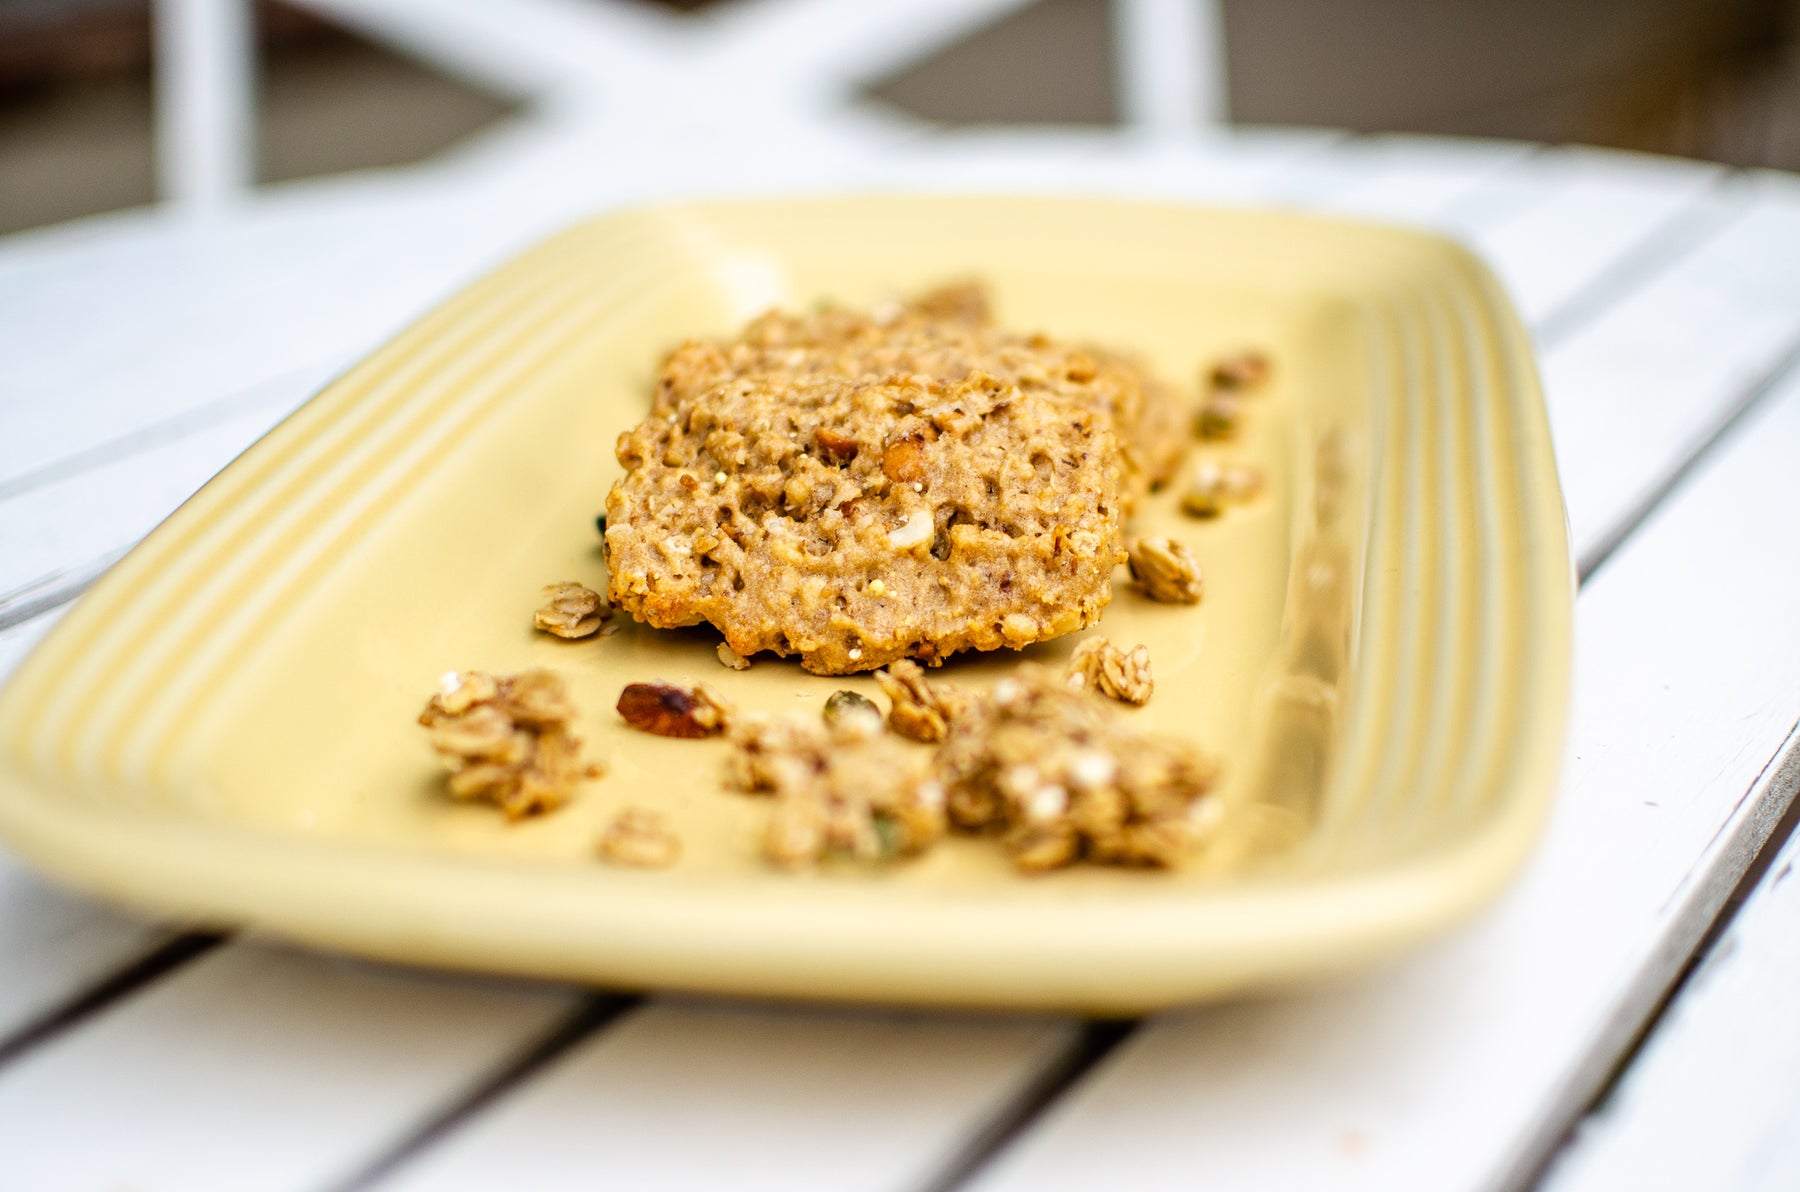 No Bake Peanut Butter Bars - A Delicious Hiking Trail Snack